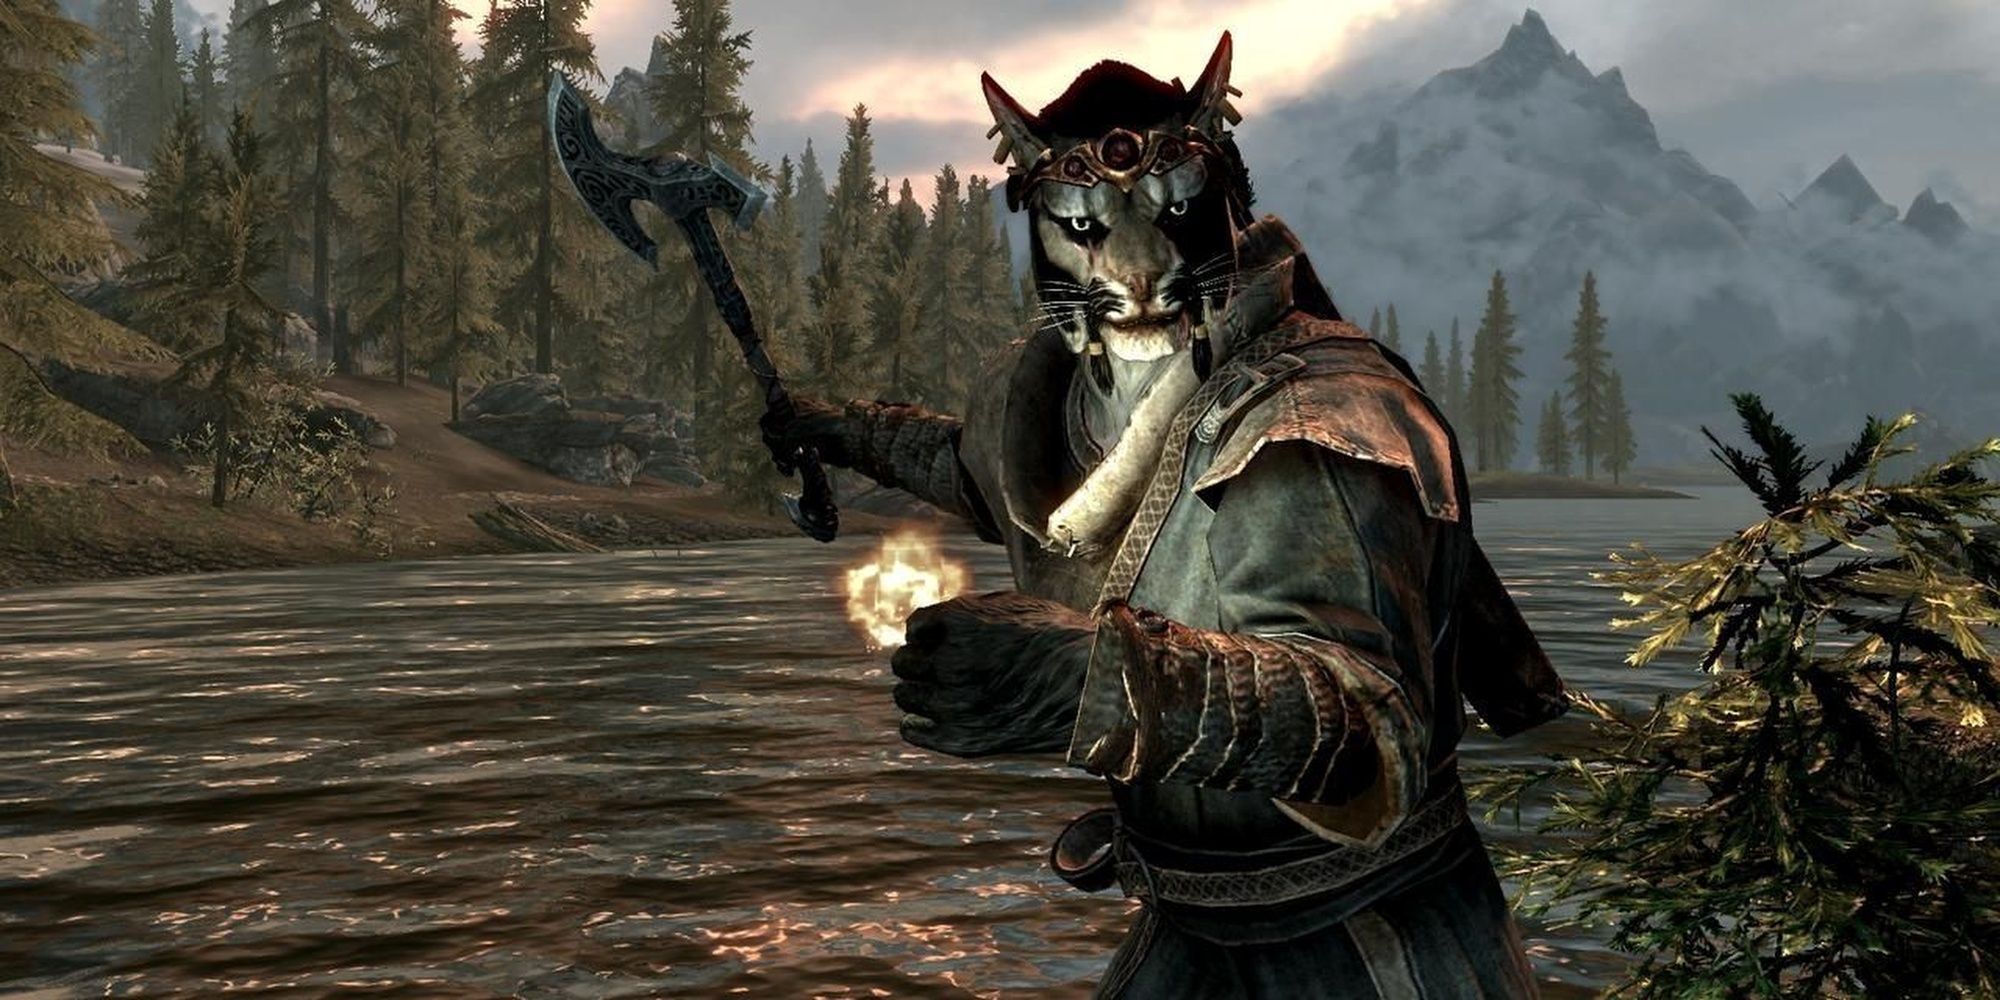 A cat-like Khajiit readies his axe and channels a spell by a river.